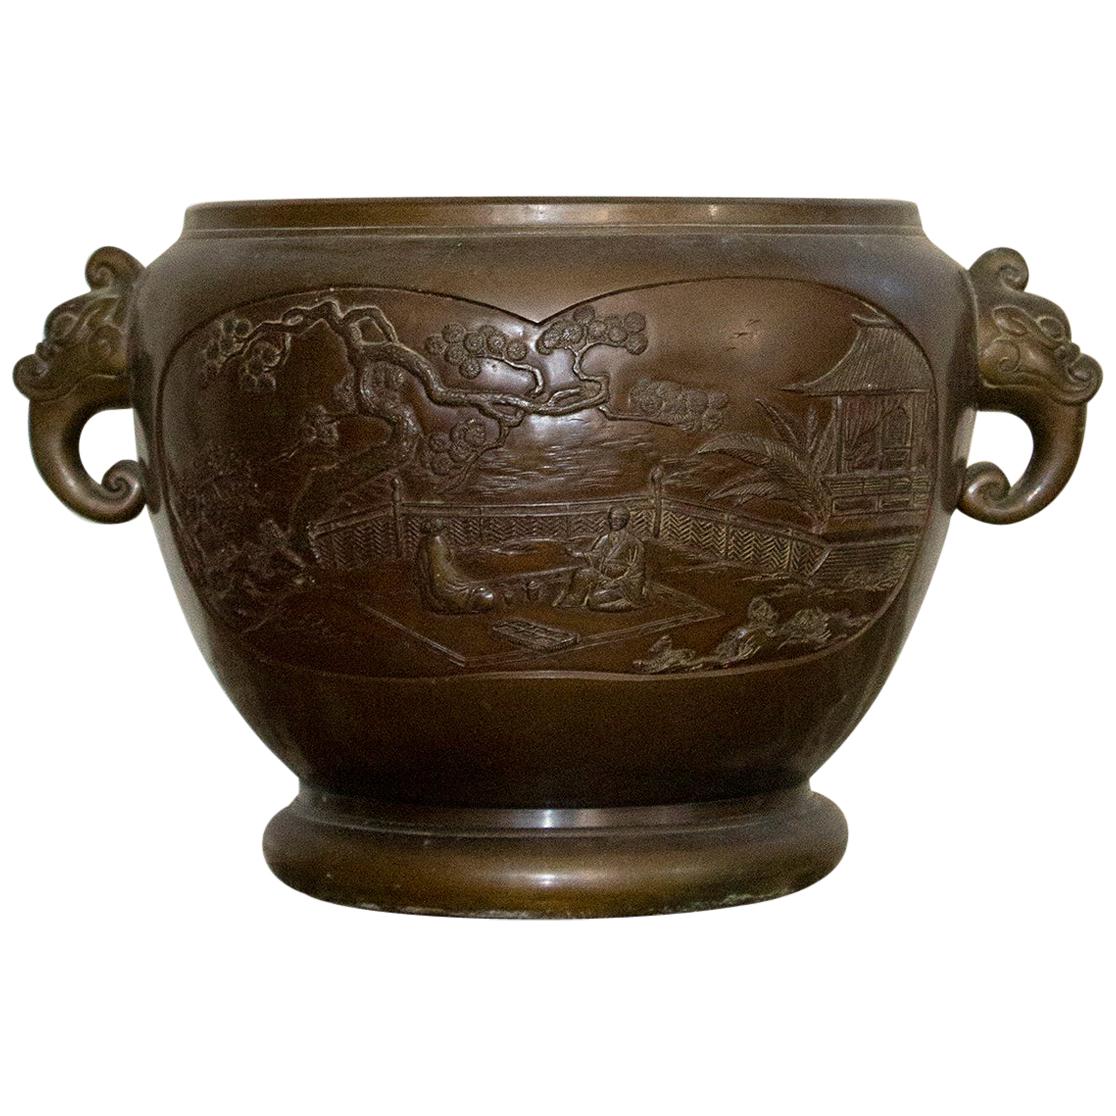 China Bronze Pot Cover with Palace Courtyard Scenes, circa 1900